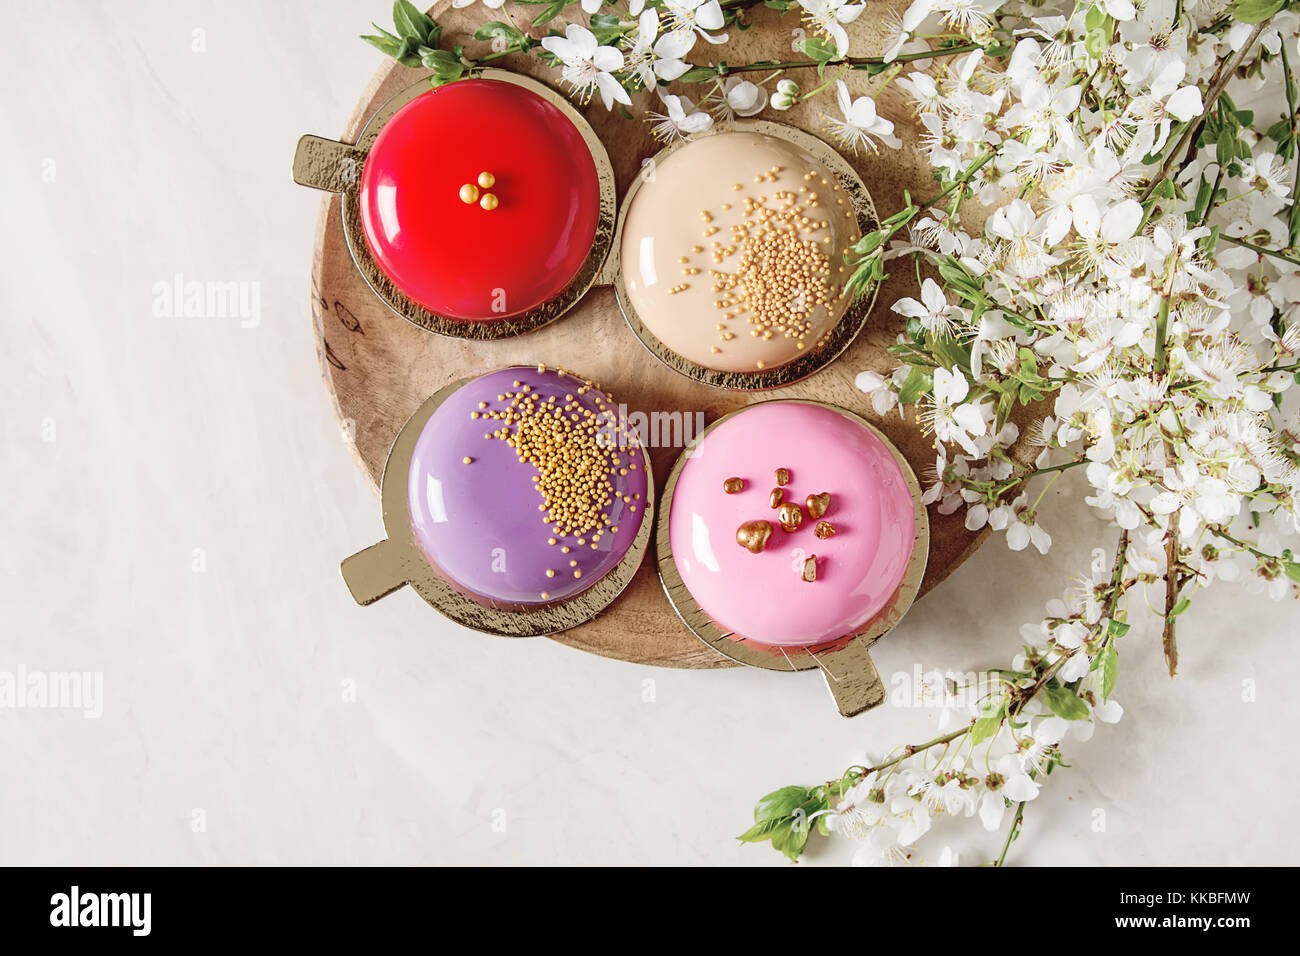 Fashionable mousse cake with a mirror glaze decorated with spring flowers. Light white background Stock Photo